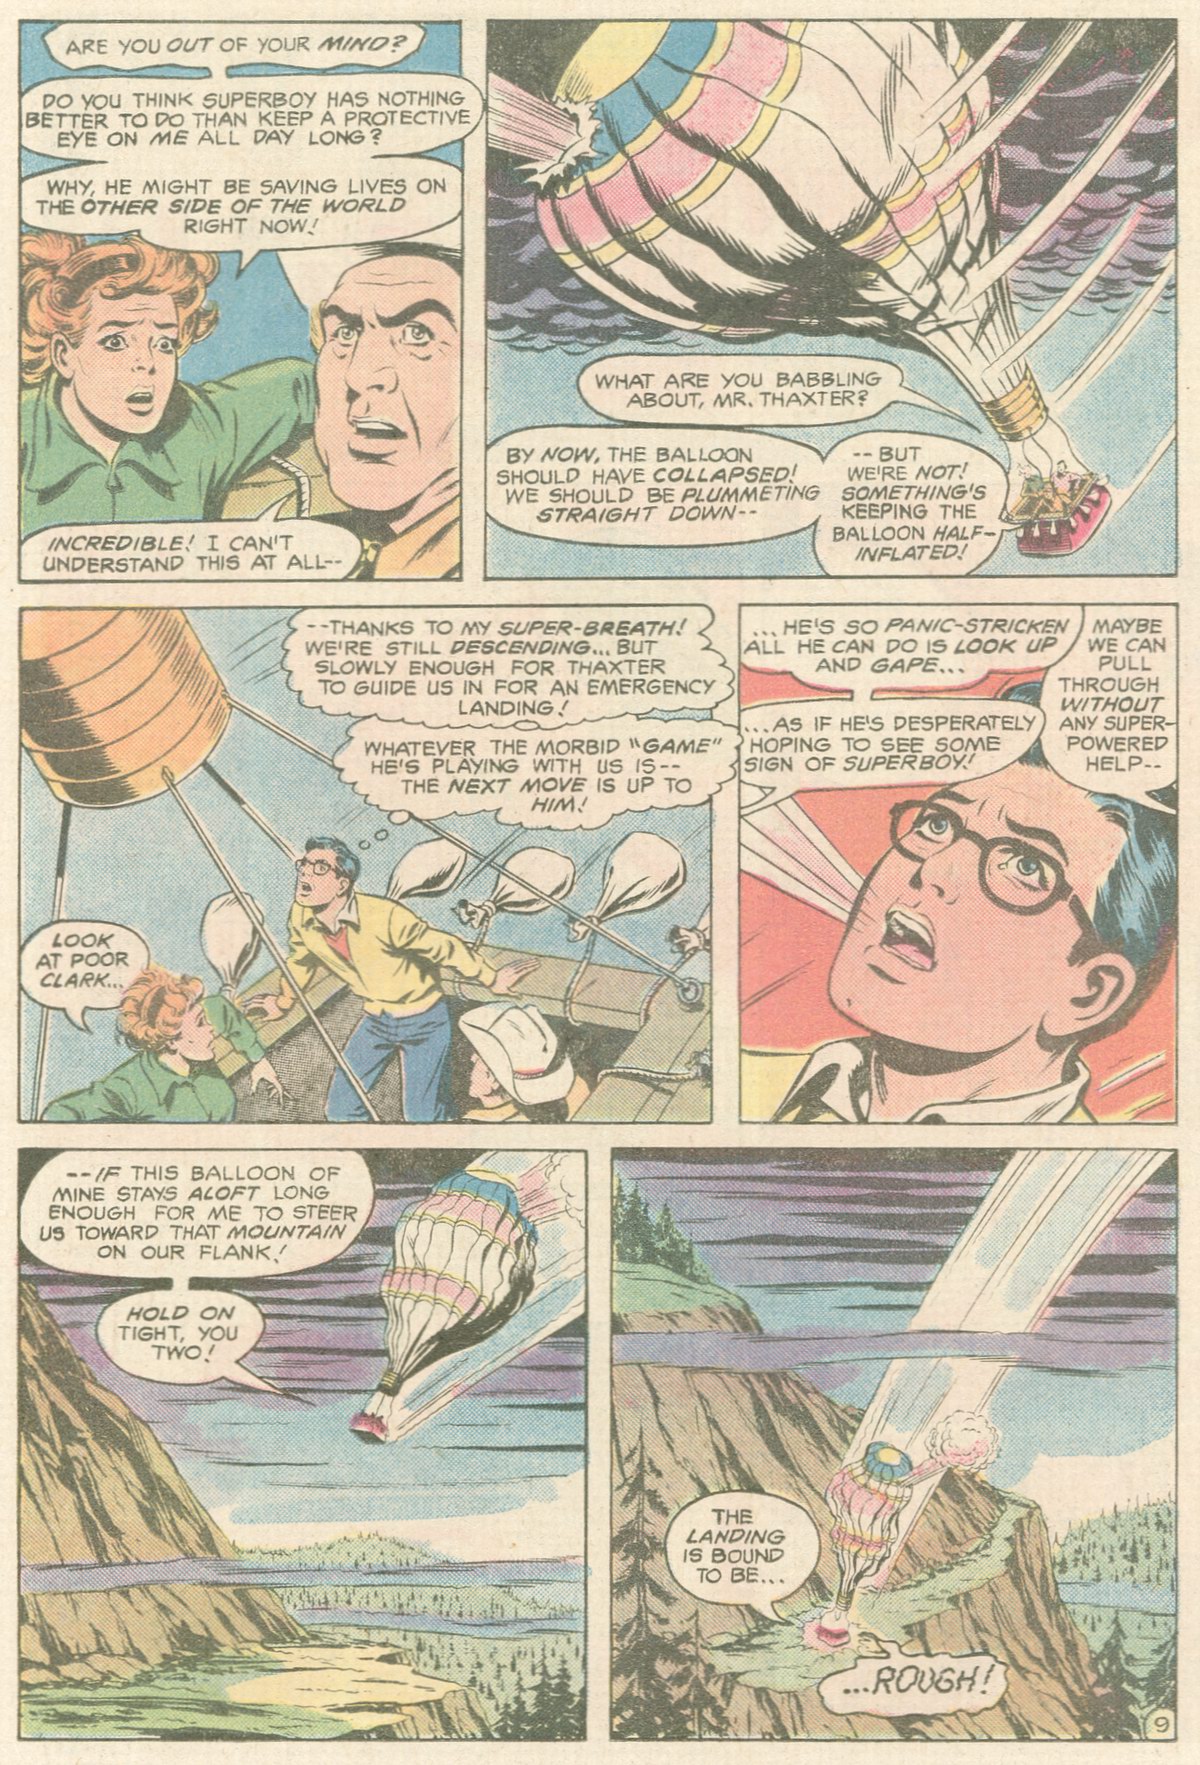 The New Adventures of Superboy 15 Page 9